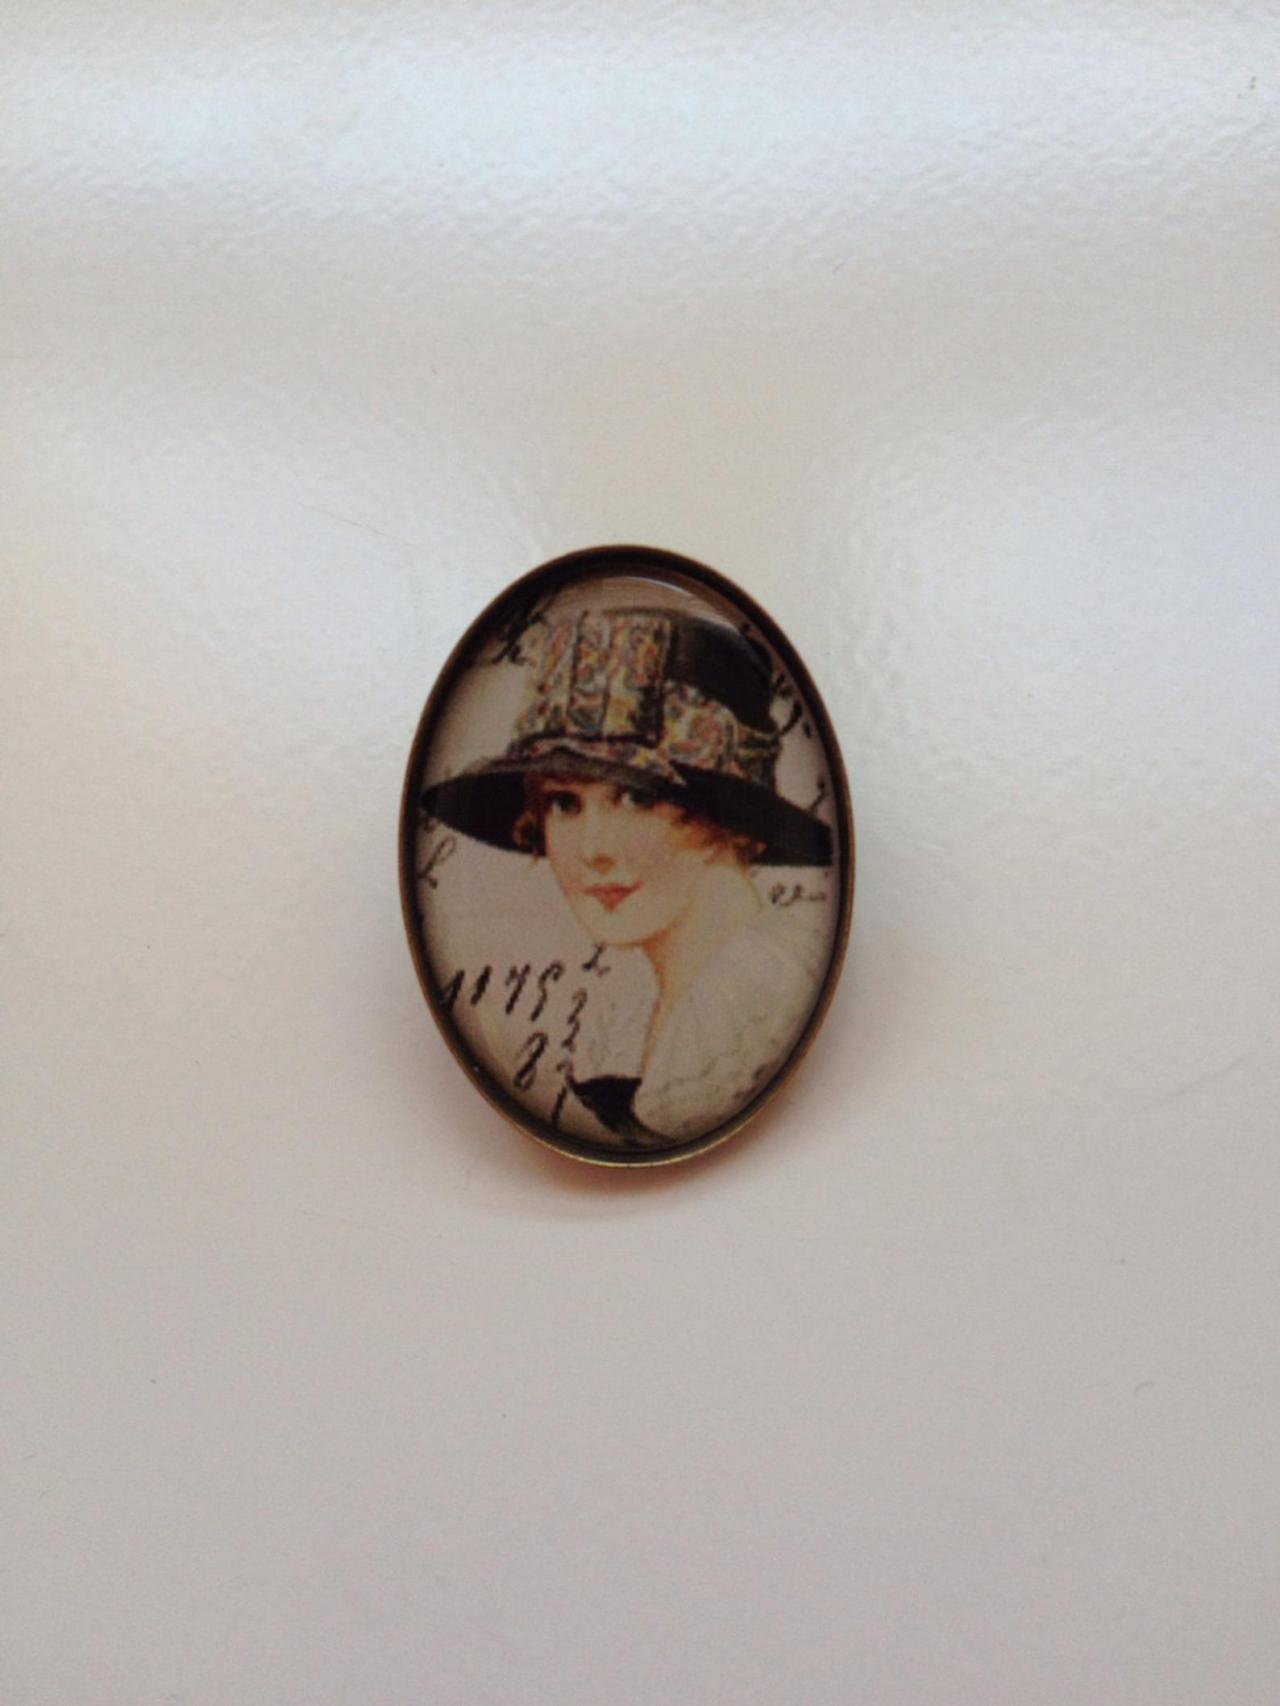 Pin 83 - old school pin old woman image brooch perfect gift vintage style autumn winter fashion